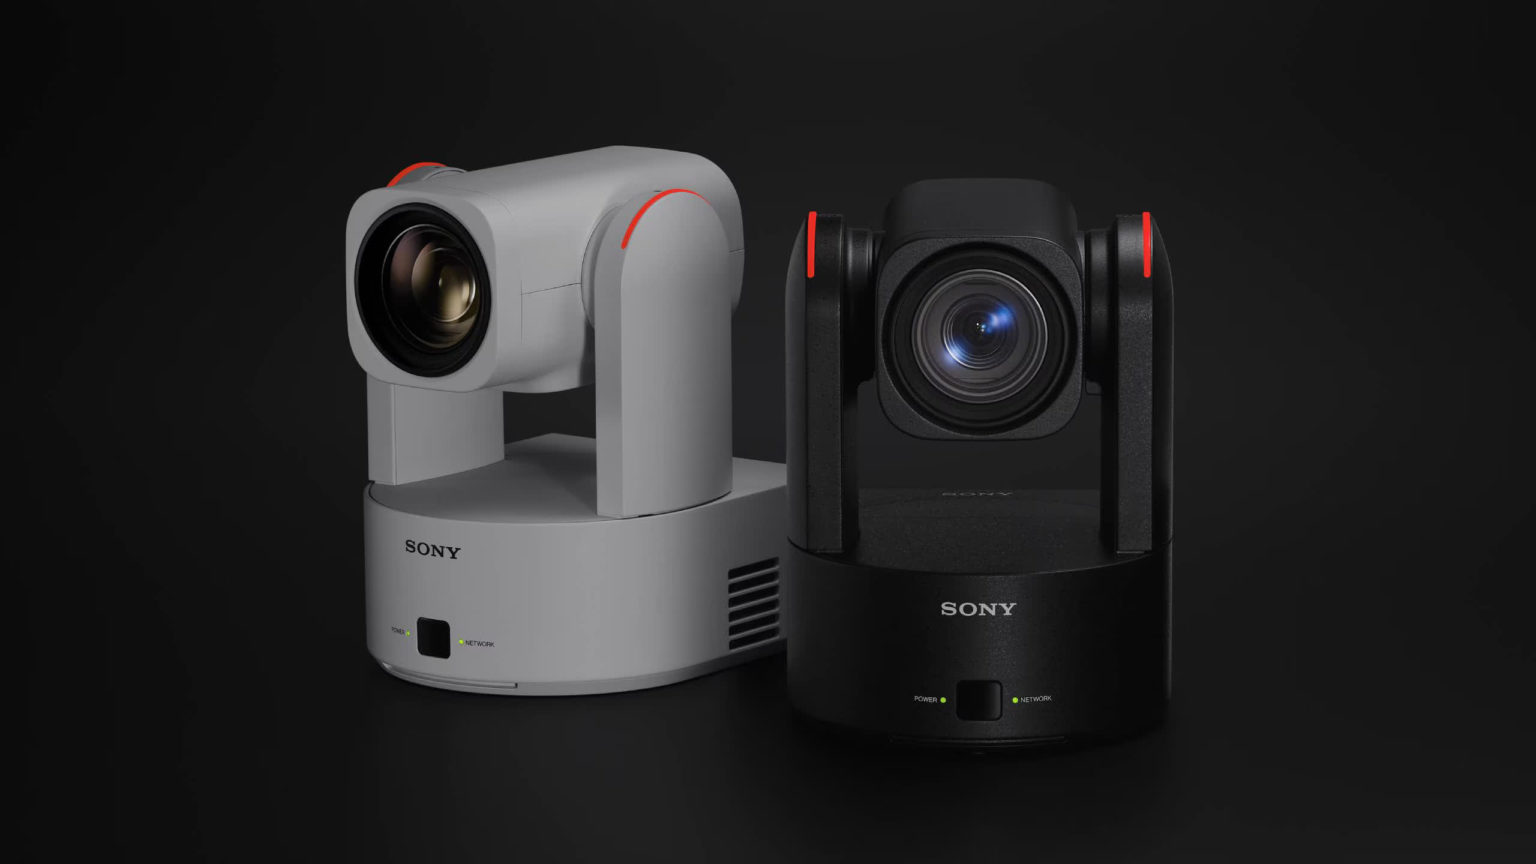 Sony debuts new flagship 4K60p Pan-Tilt-Zoom camera with AI auto framing